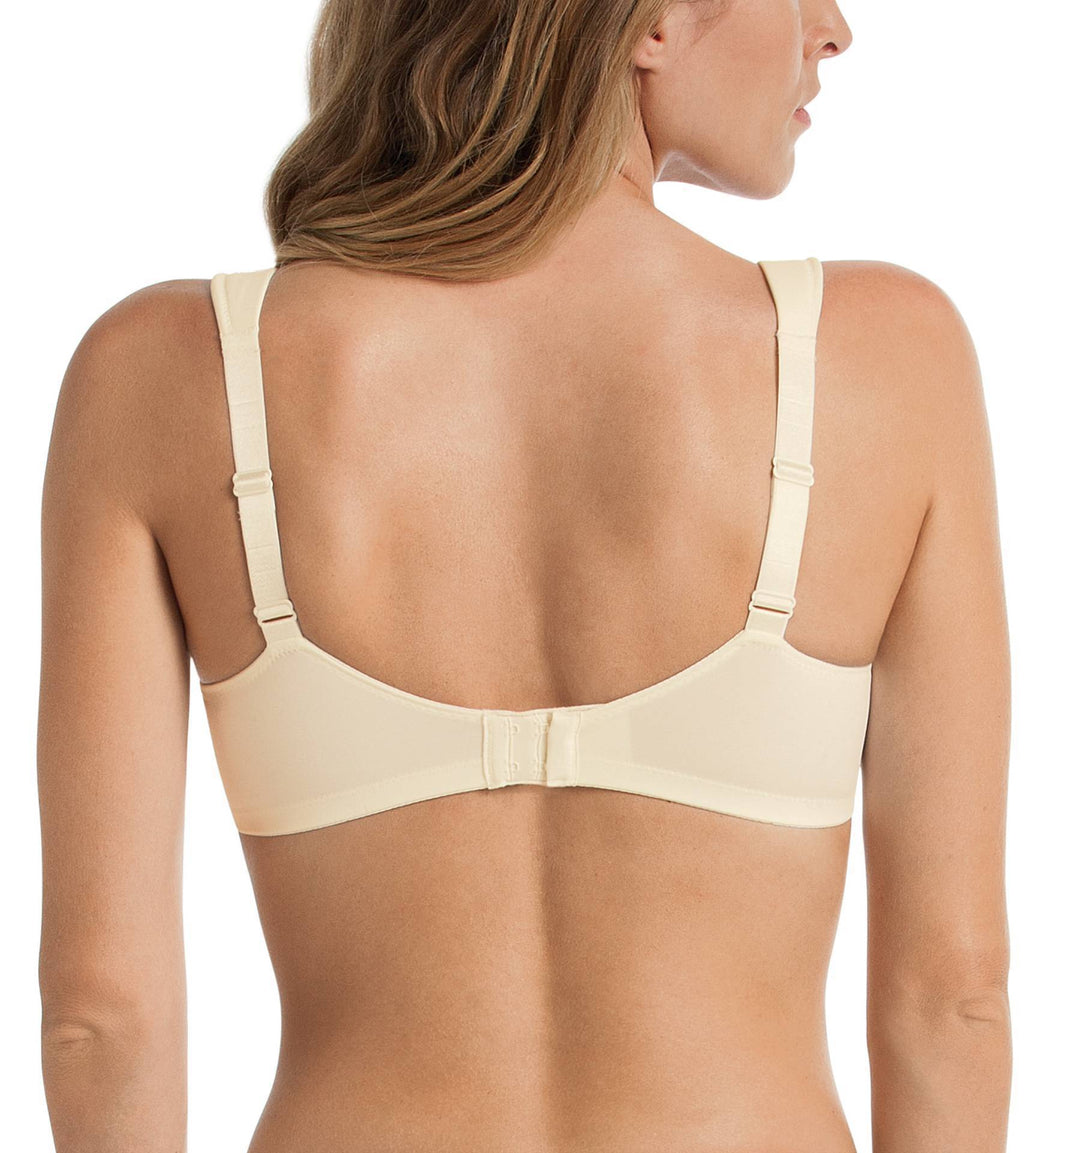 straps design to assist with low shoulders, padded for comfort